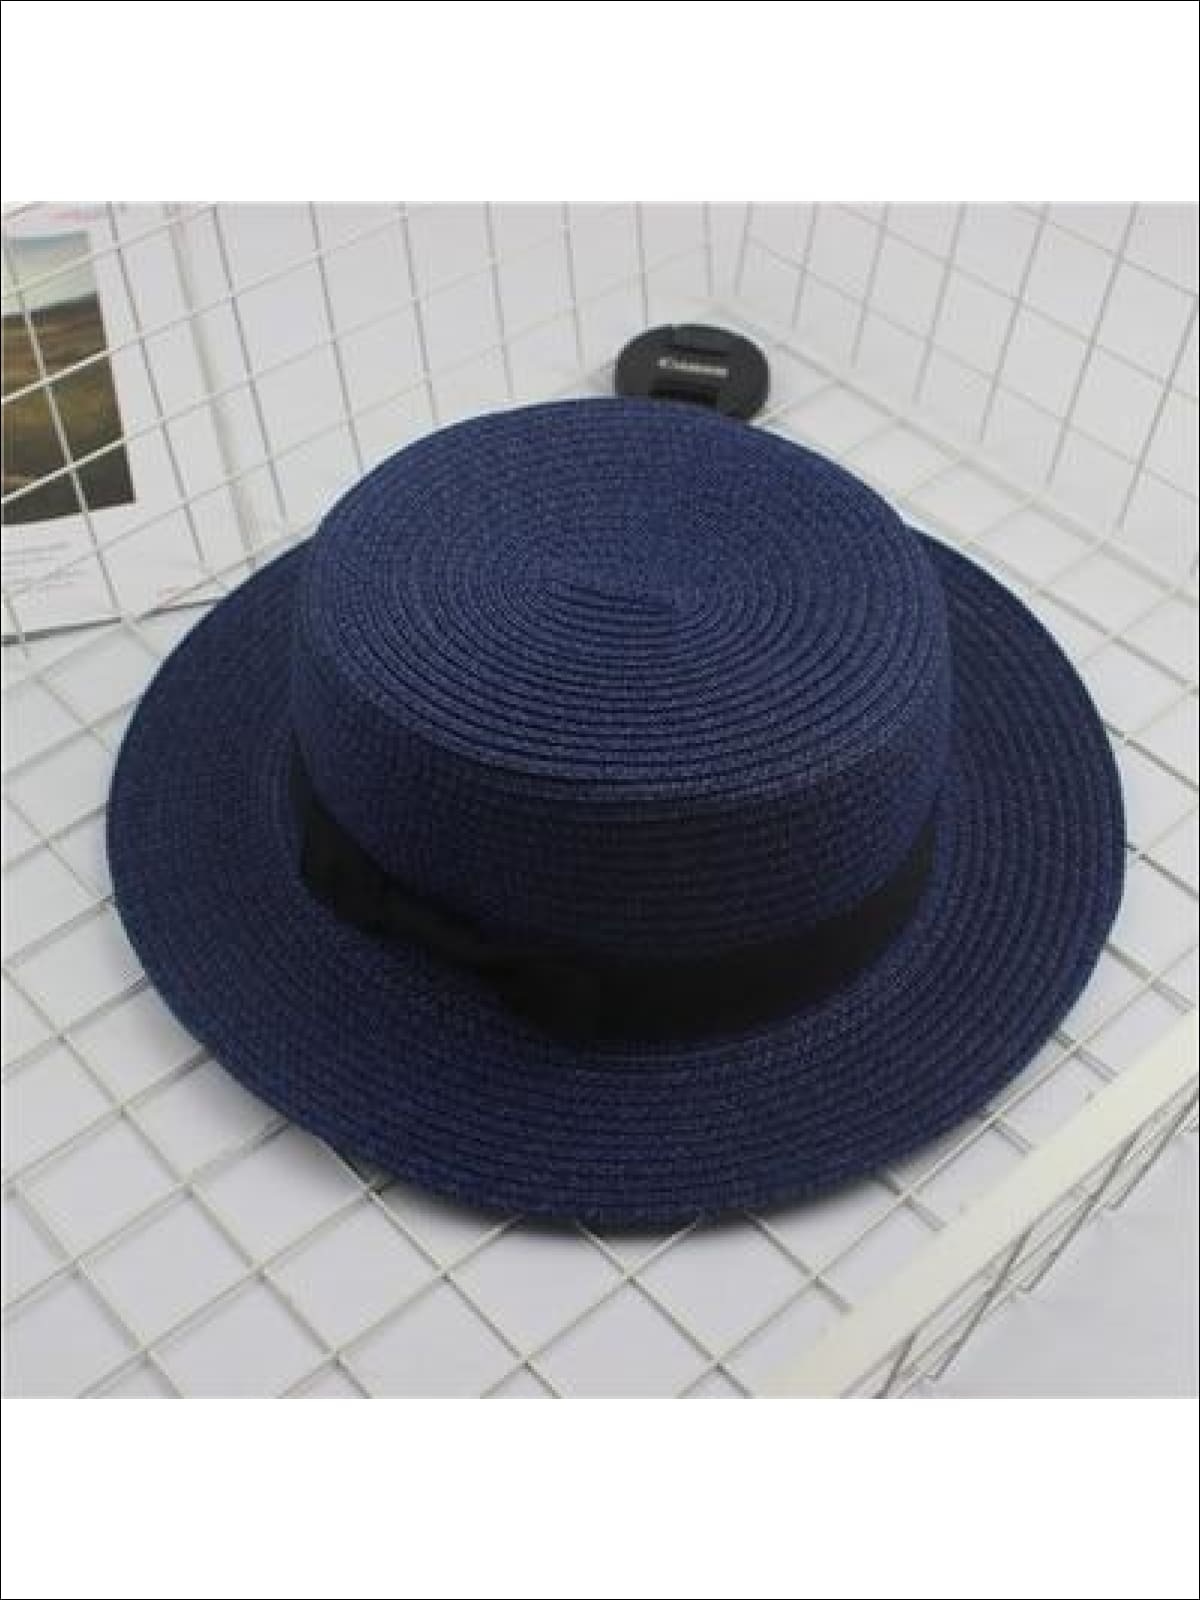 Girls Woven Straw Fedora Hat with Bow Tie (Multiple Color Options) - Navy / One Size - Girls Hats